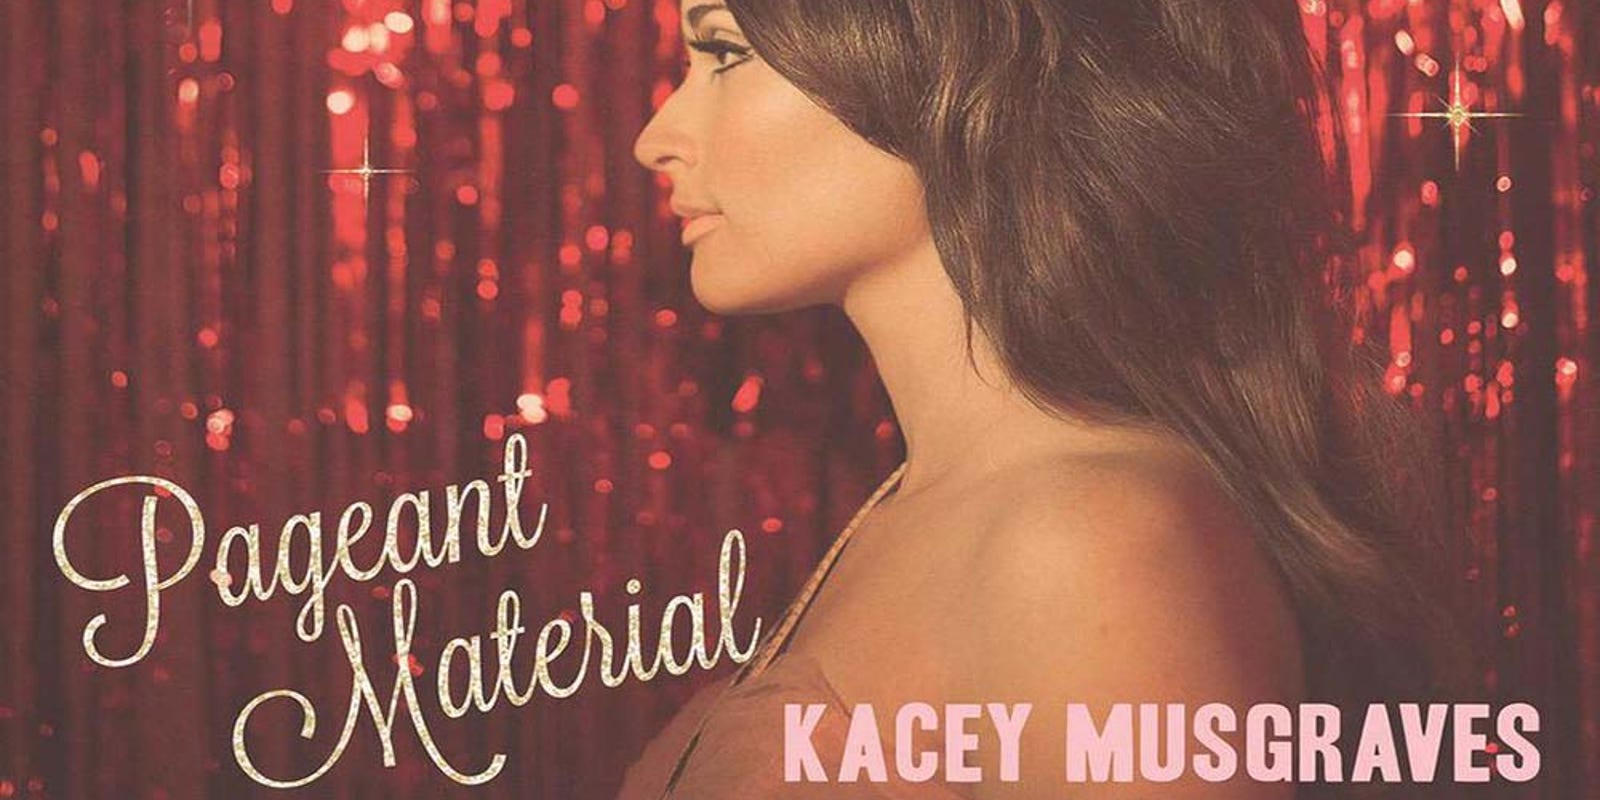 Kacey Musgraves matches the magic of her debut.